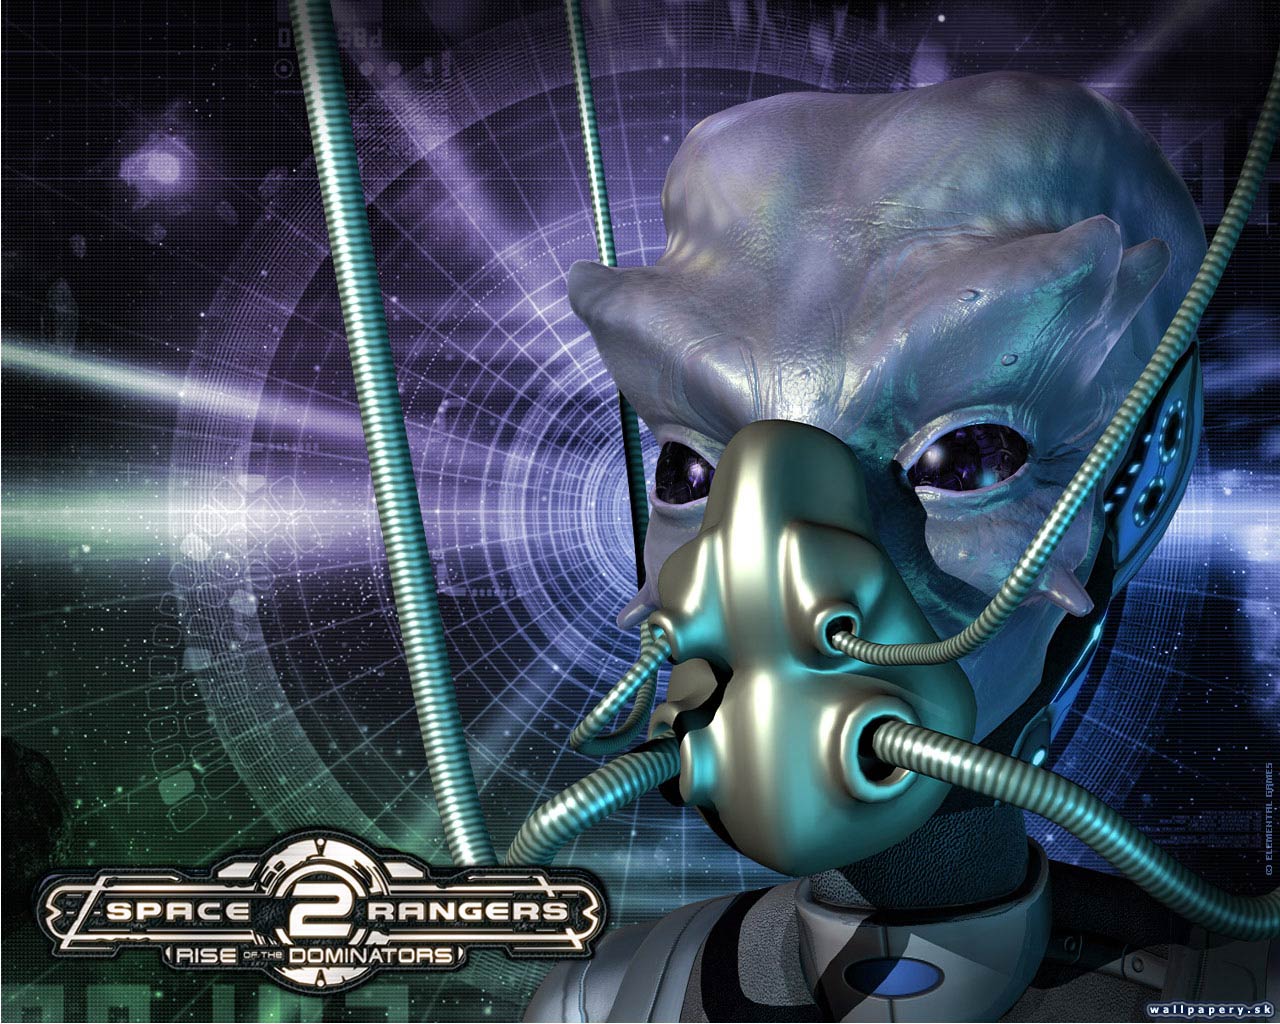 Space Rangers 2: Rise Of The Dominators - wallpaper 5